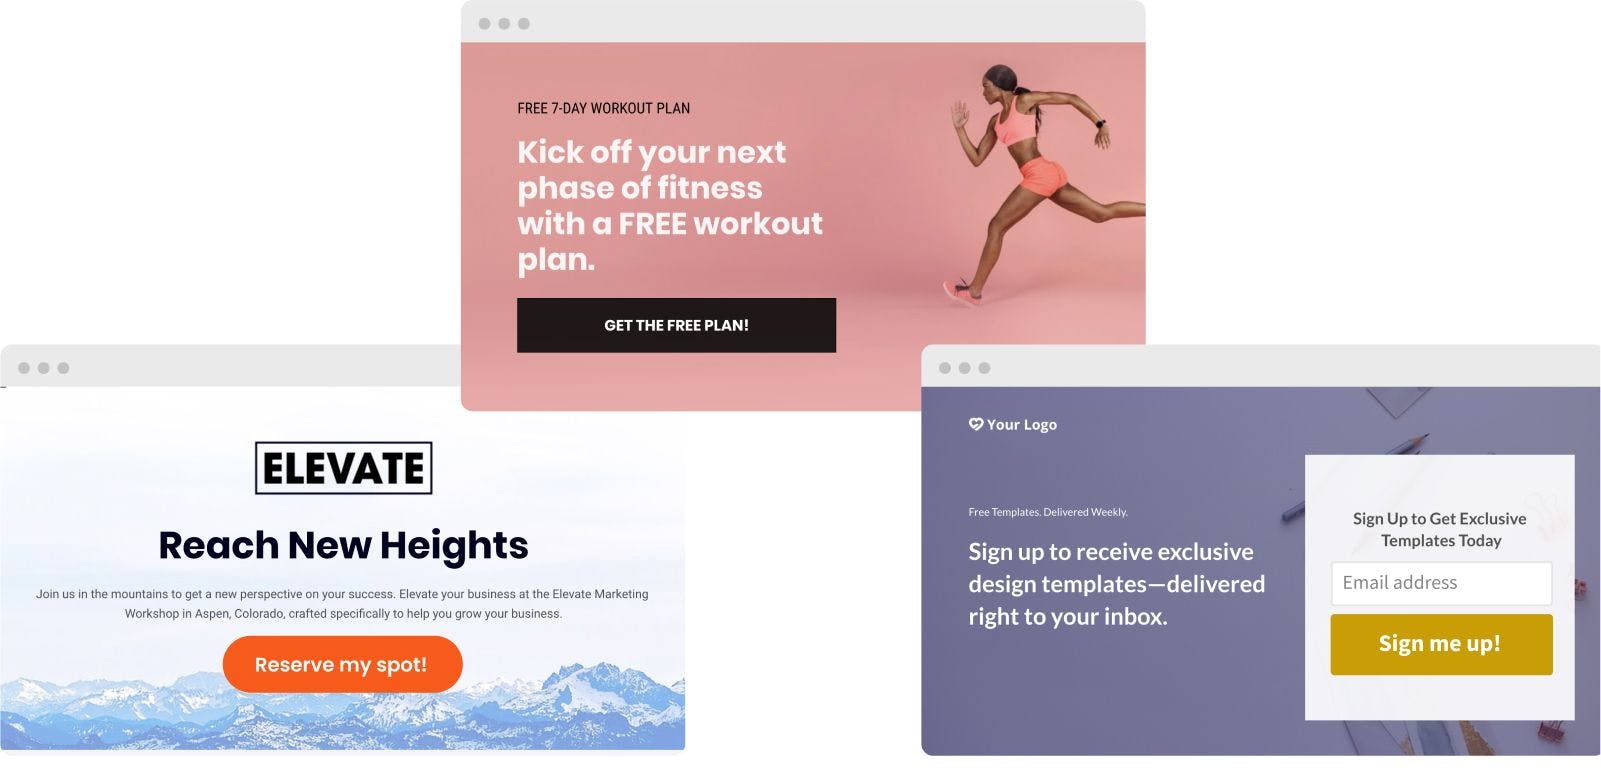 Landing page examples: event sign up, lead magnet, and lead capture